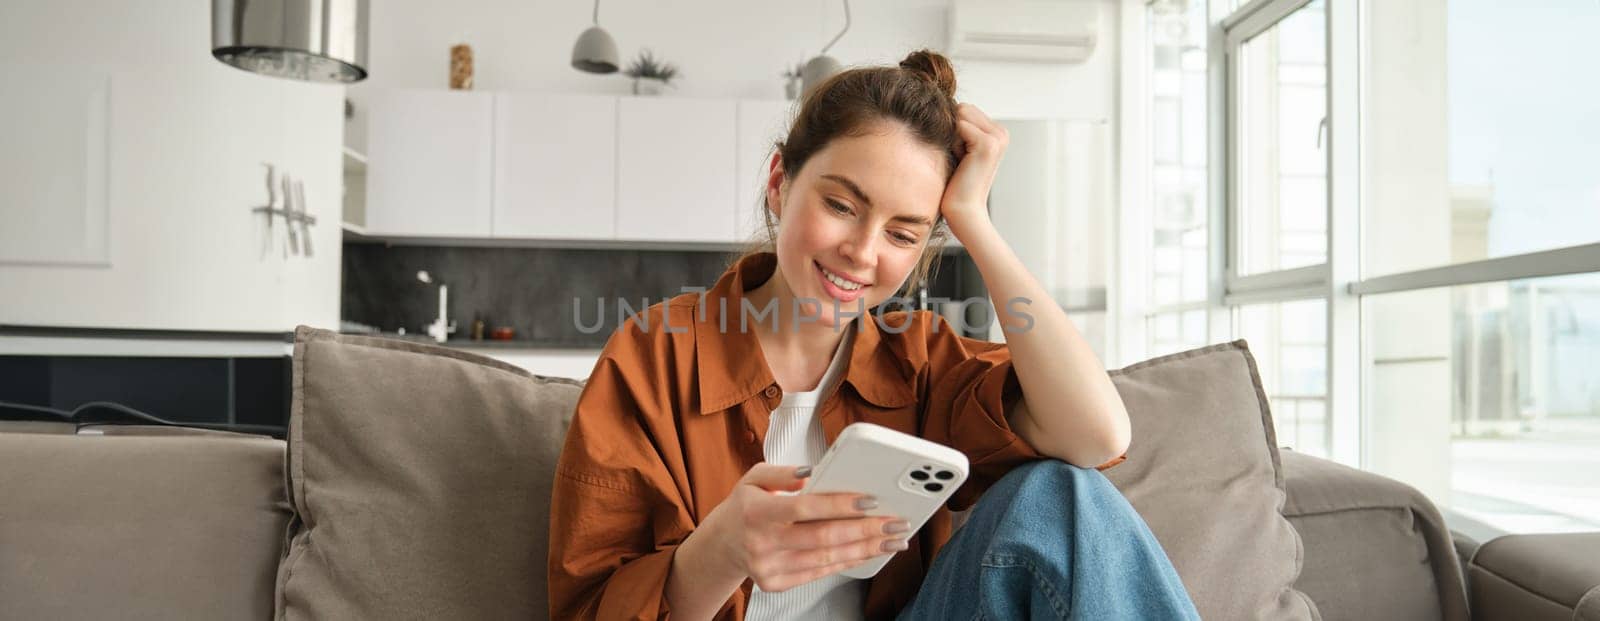 Portrait of happy young brunette woman sitting on sofa with smartphone, reading notification, messaging on mobile phone, resting on couch at home, smiling while looking at device screen.